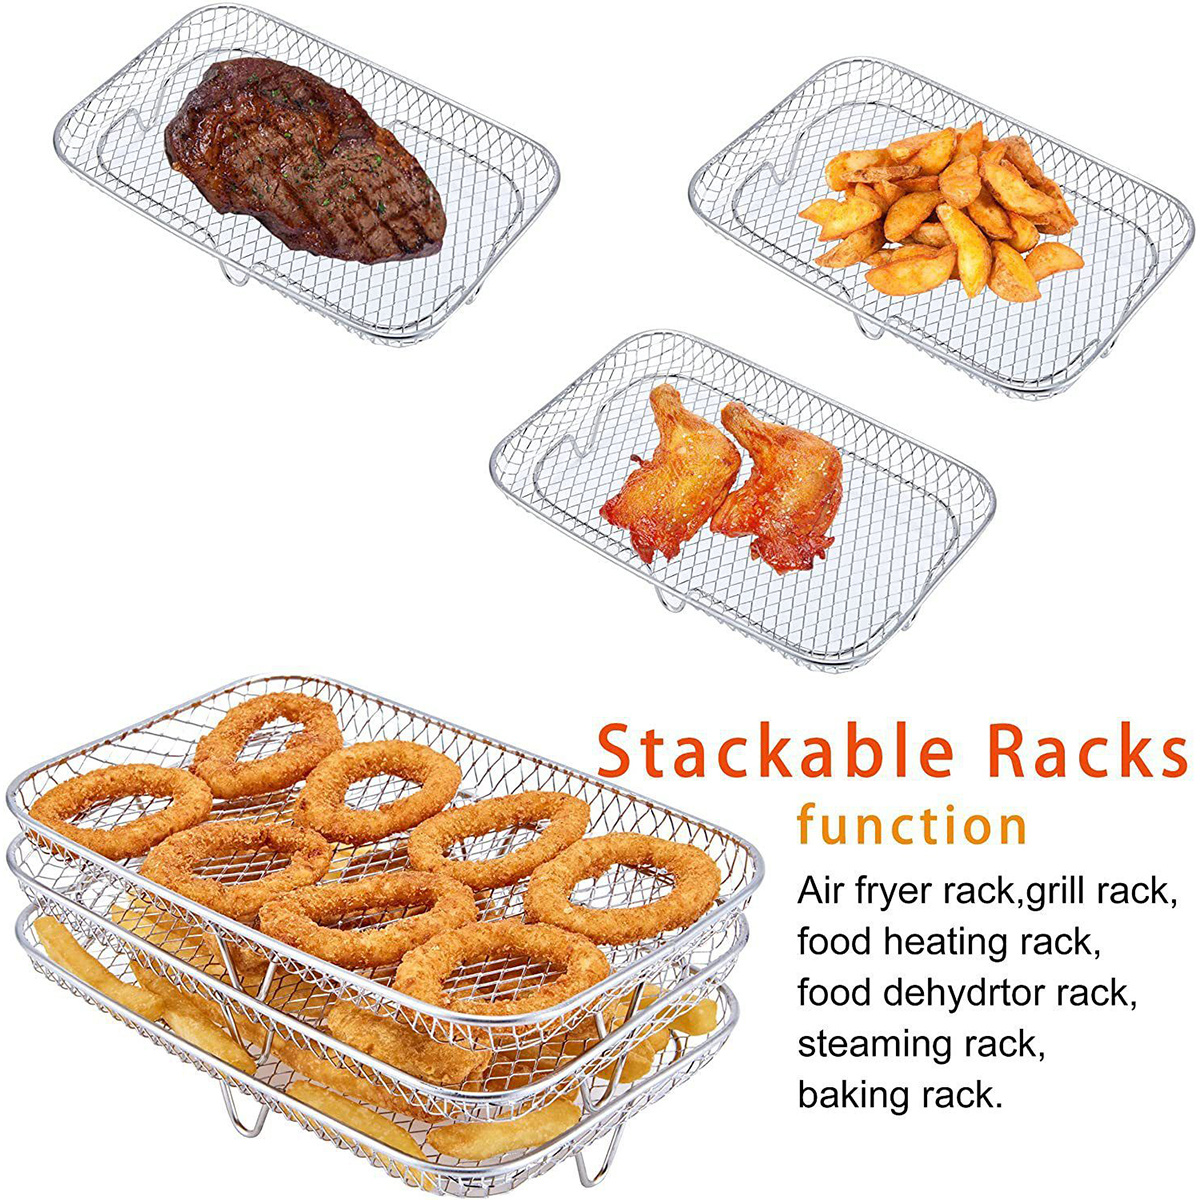 Air Fryer Accessories Three Stackable Racks for Gowise Phillips